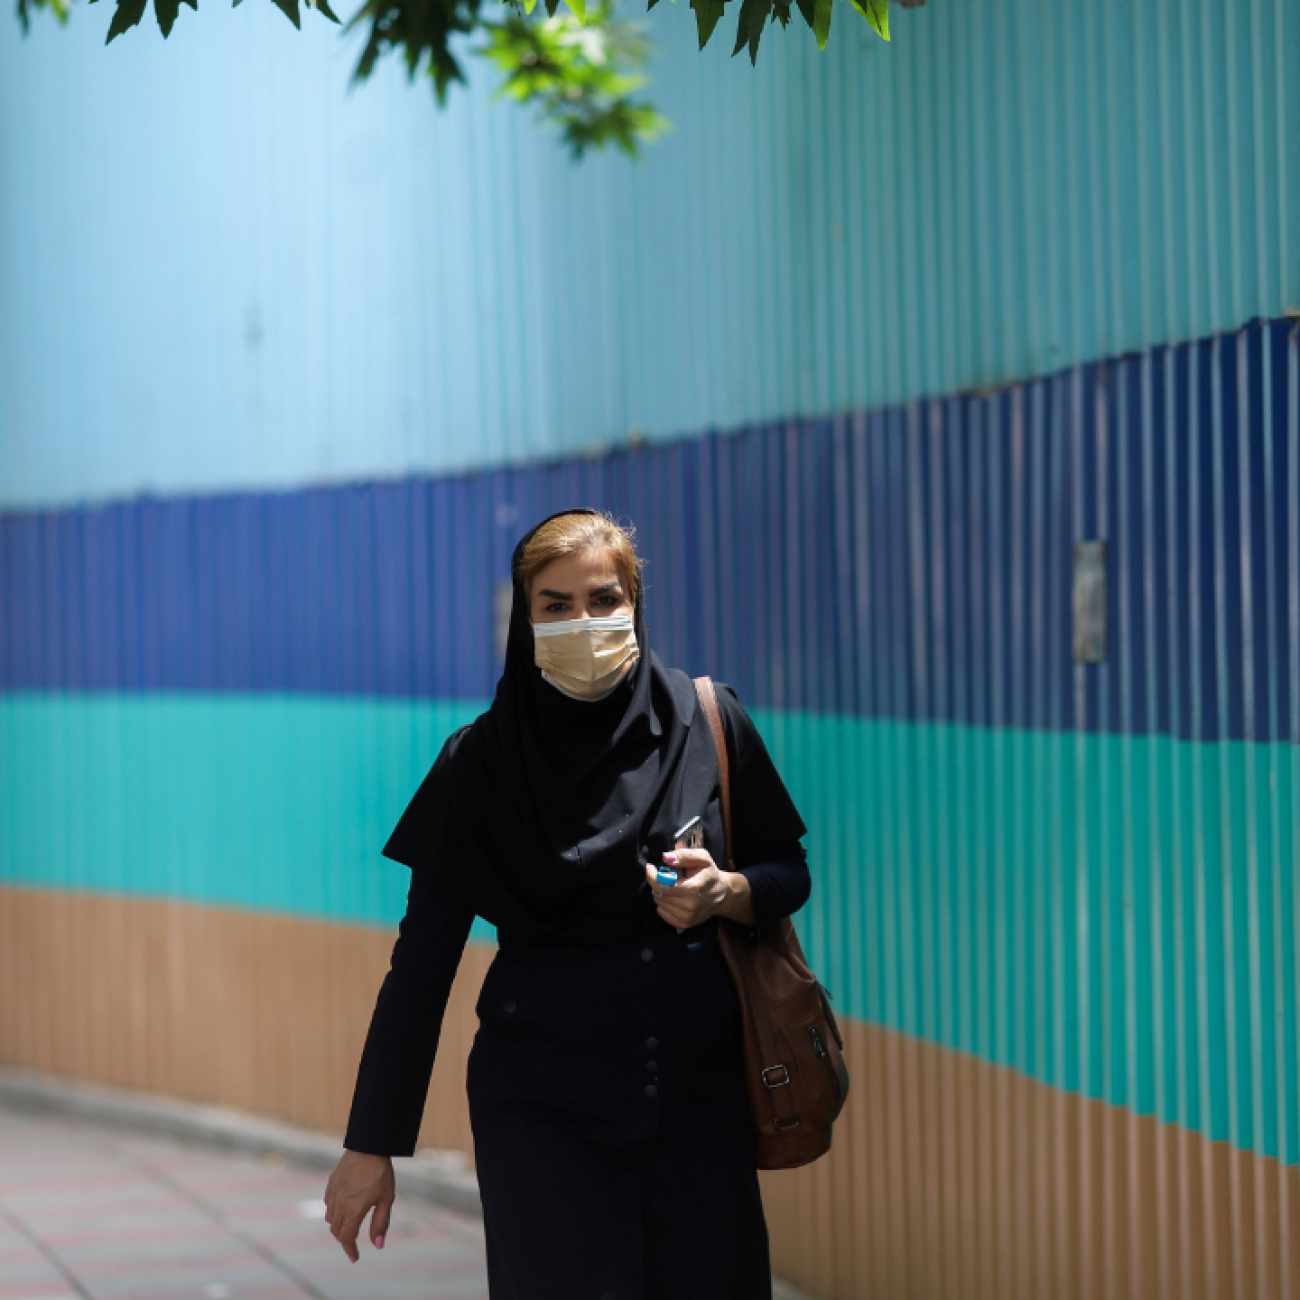 An woman walks along a street in Tehran, Iran, on May 26, 2021. Behind her stretches a wall with thick colorful horizontal stripes in shadess of blue and aqua.